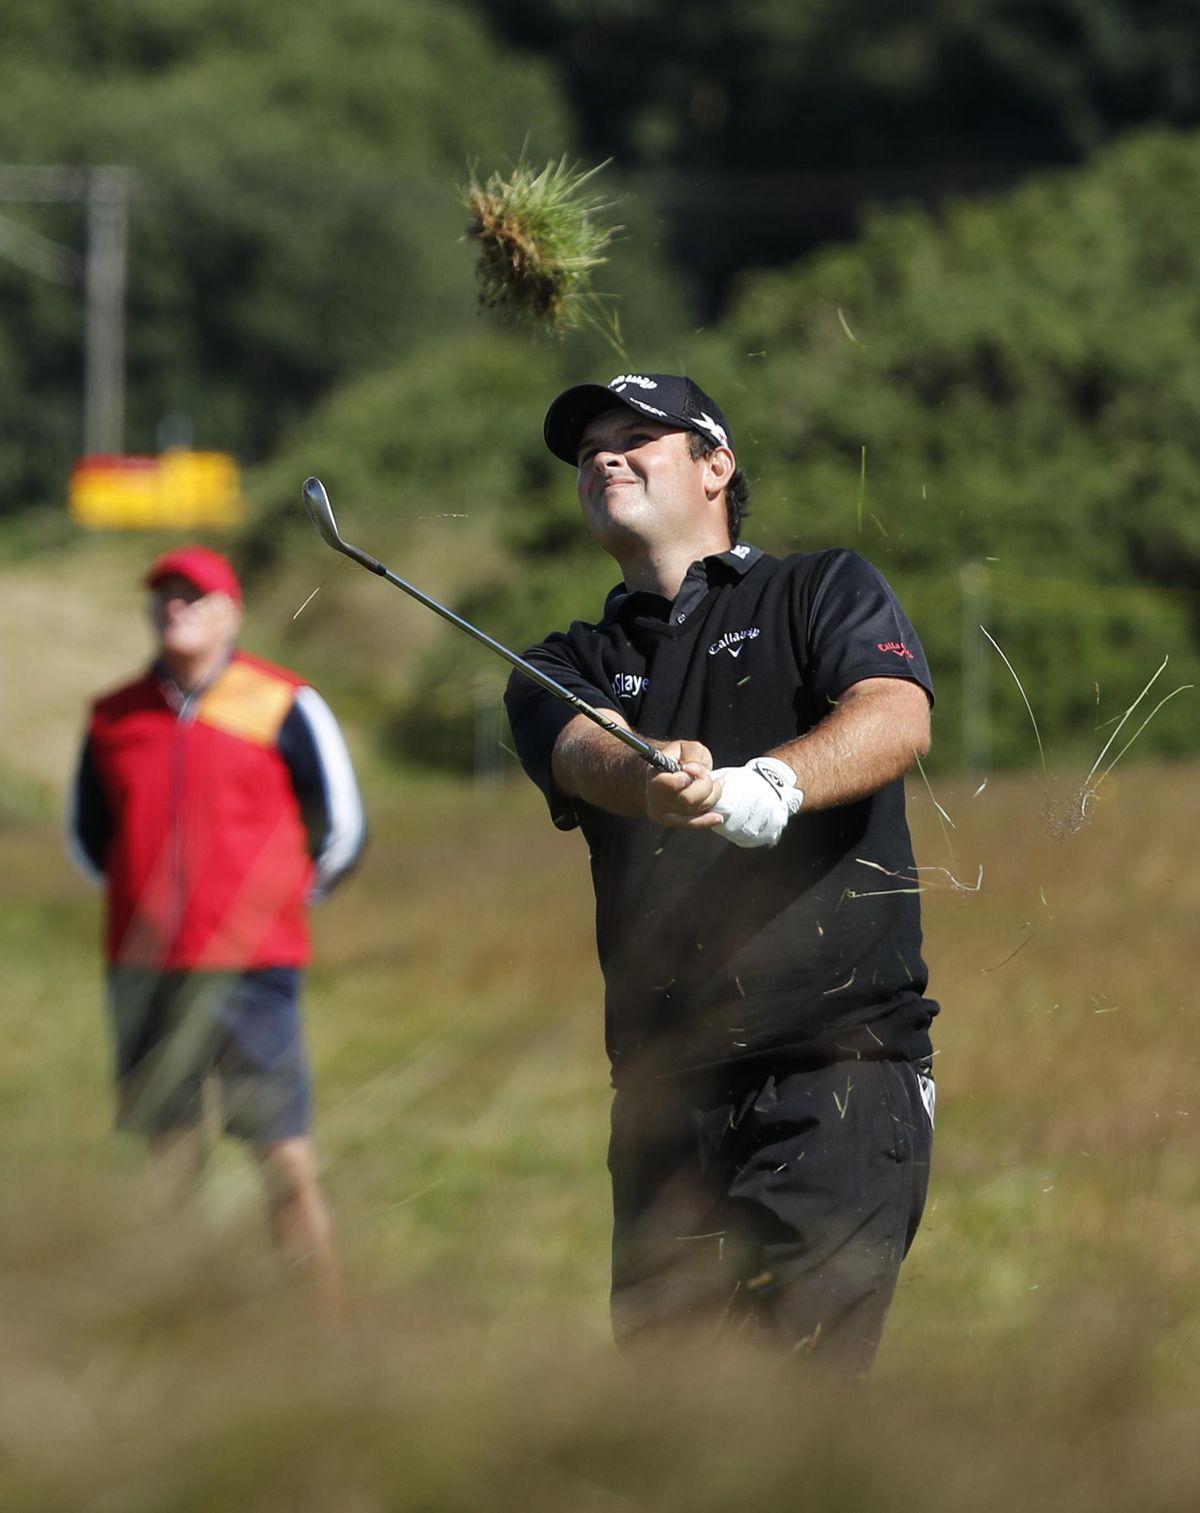 Patrick Reed of the U.S. plays out of the heavy rough on the 12th fairway during the first round of the British Open Golf Championship at the Royal Troon Golf Club in Troon, Scotland on Thursday. (Ben Curtis / Associated Press)